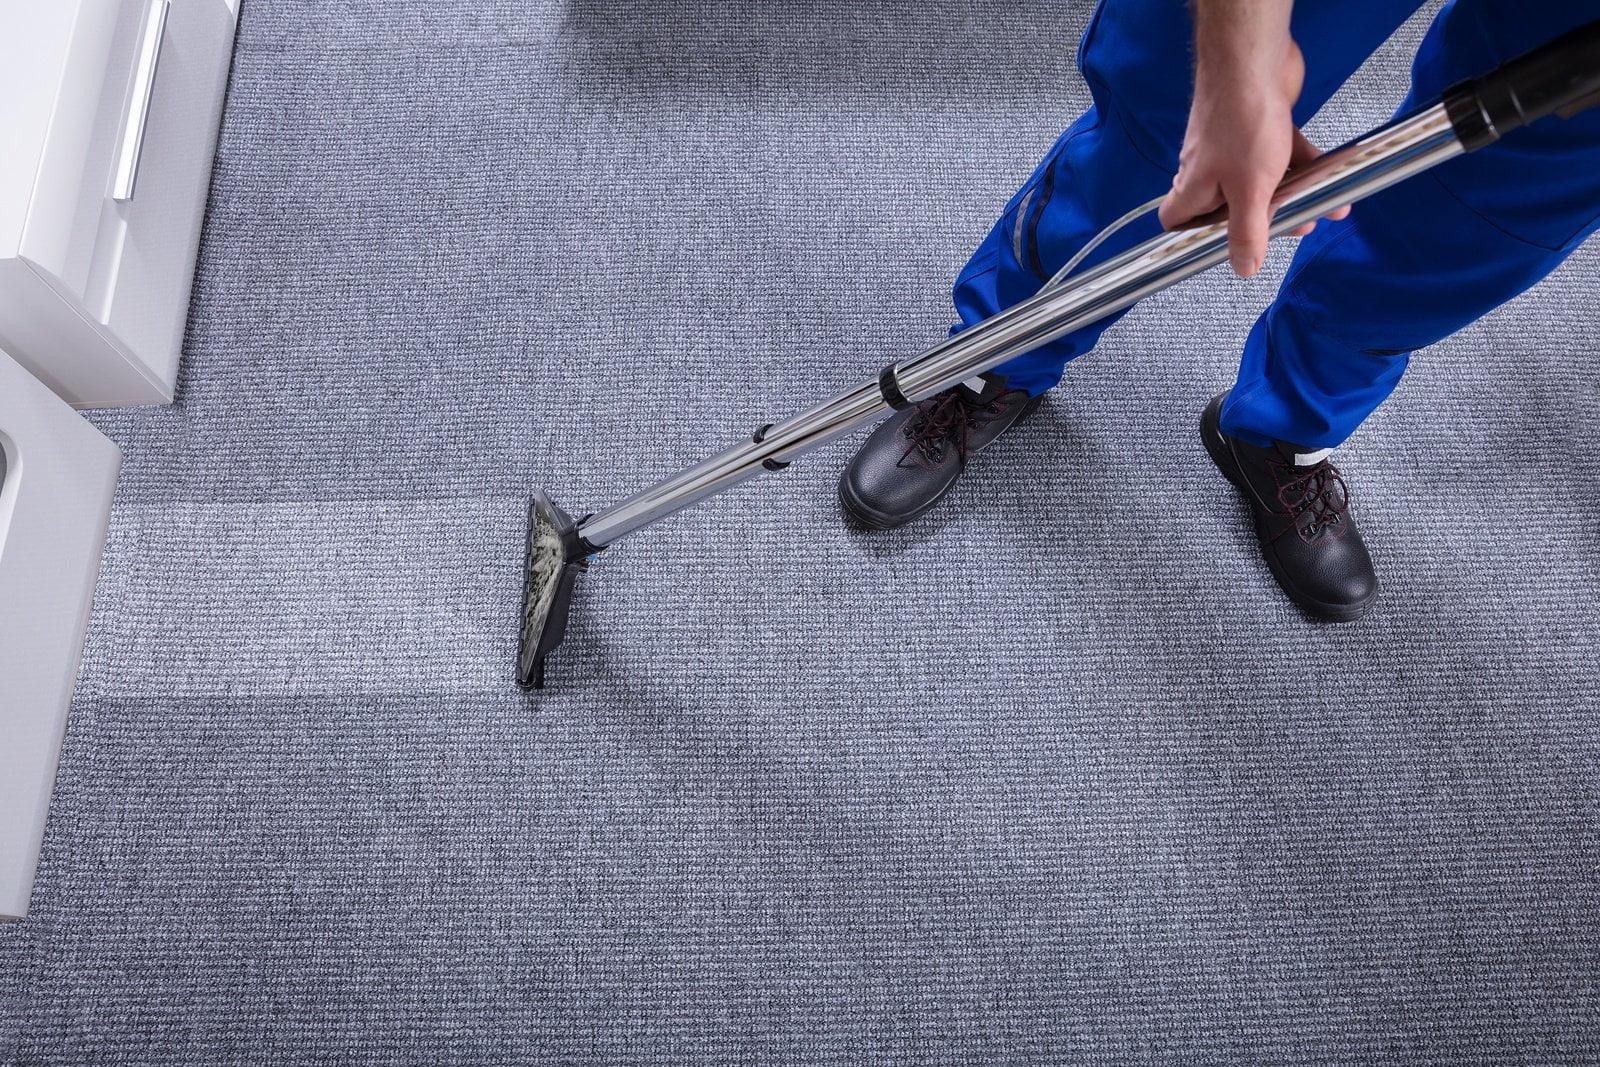 How to choose a carpet cleaning company